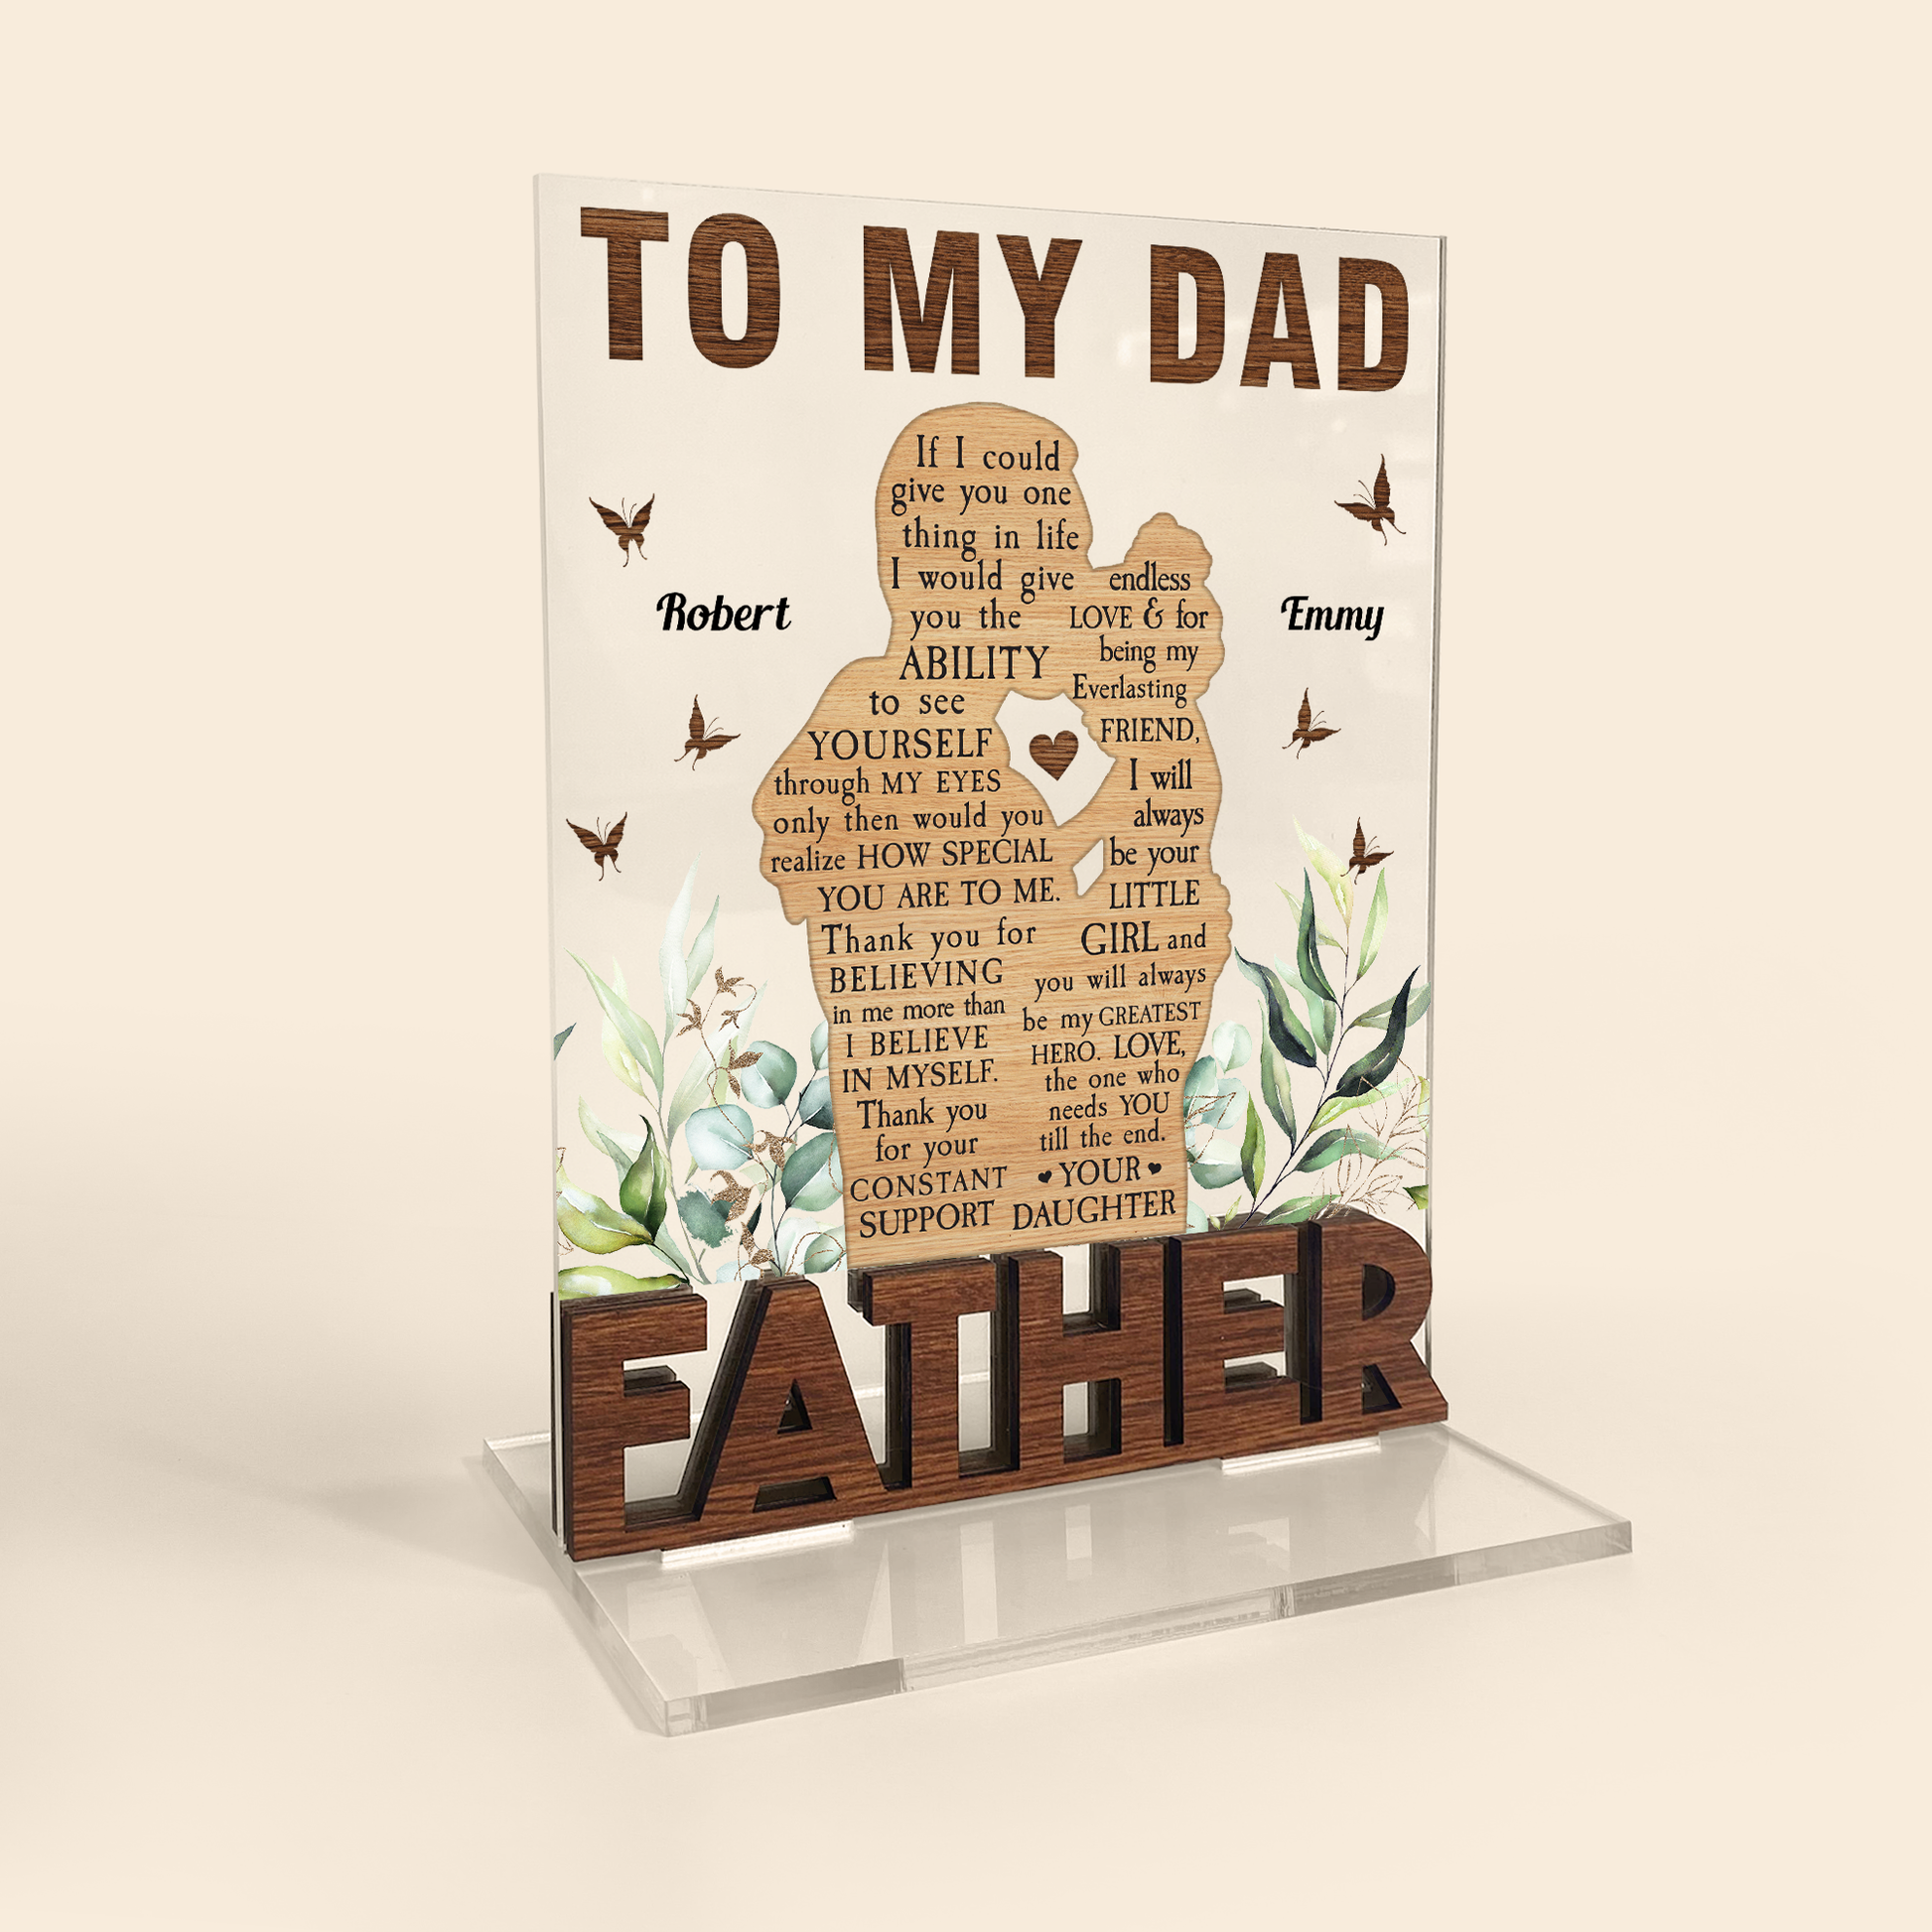 I'm Always Your Little Girl & You're Always My Greatest Hero, Dad - Personalized Acrylic Plaque With Standing Wood Letters - Father's Day, Appreciate Gift For Dad, Father, Daddy, Husband - From Daughters, Wife